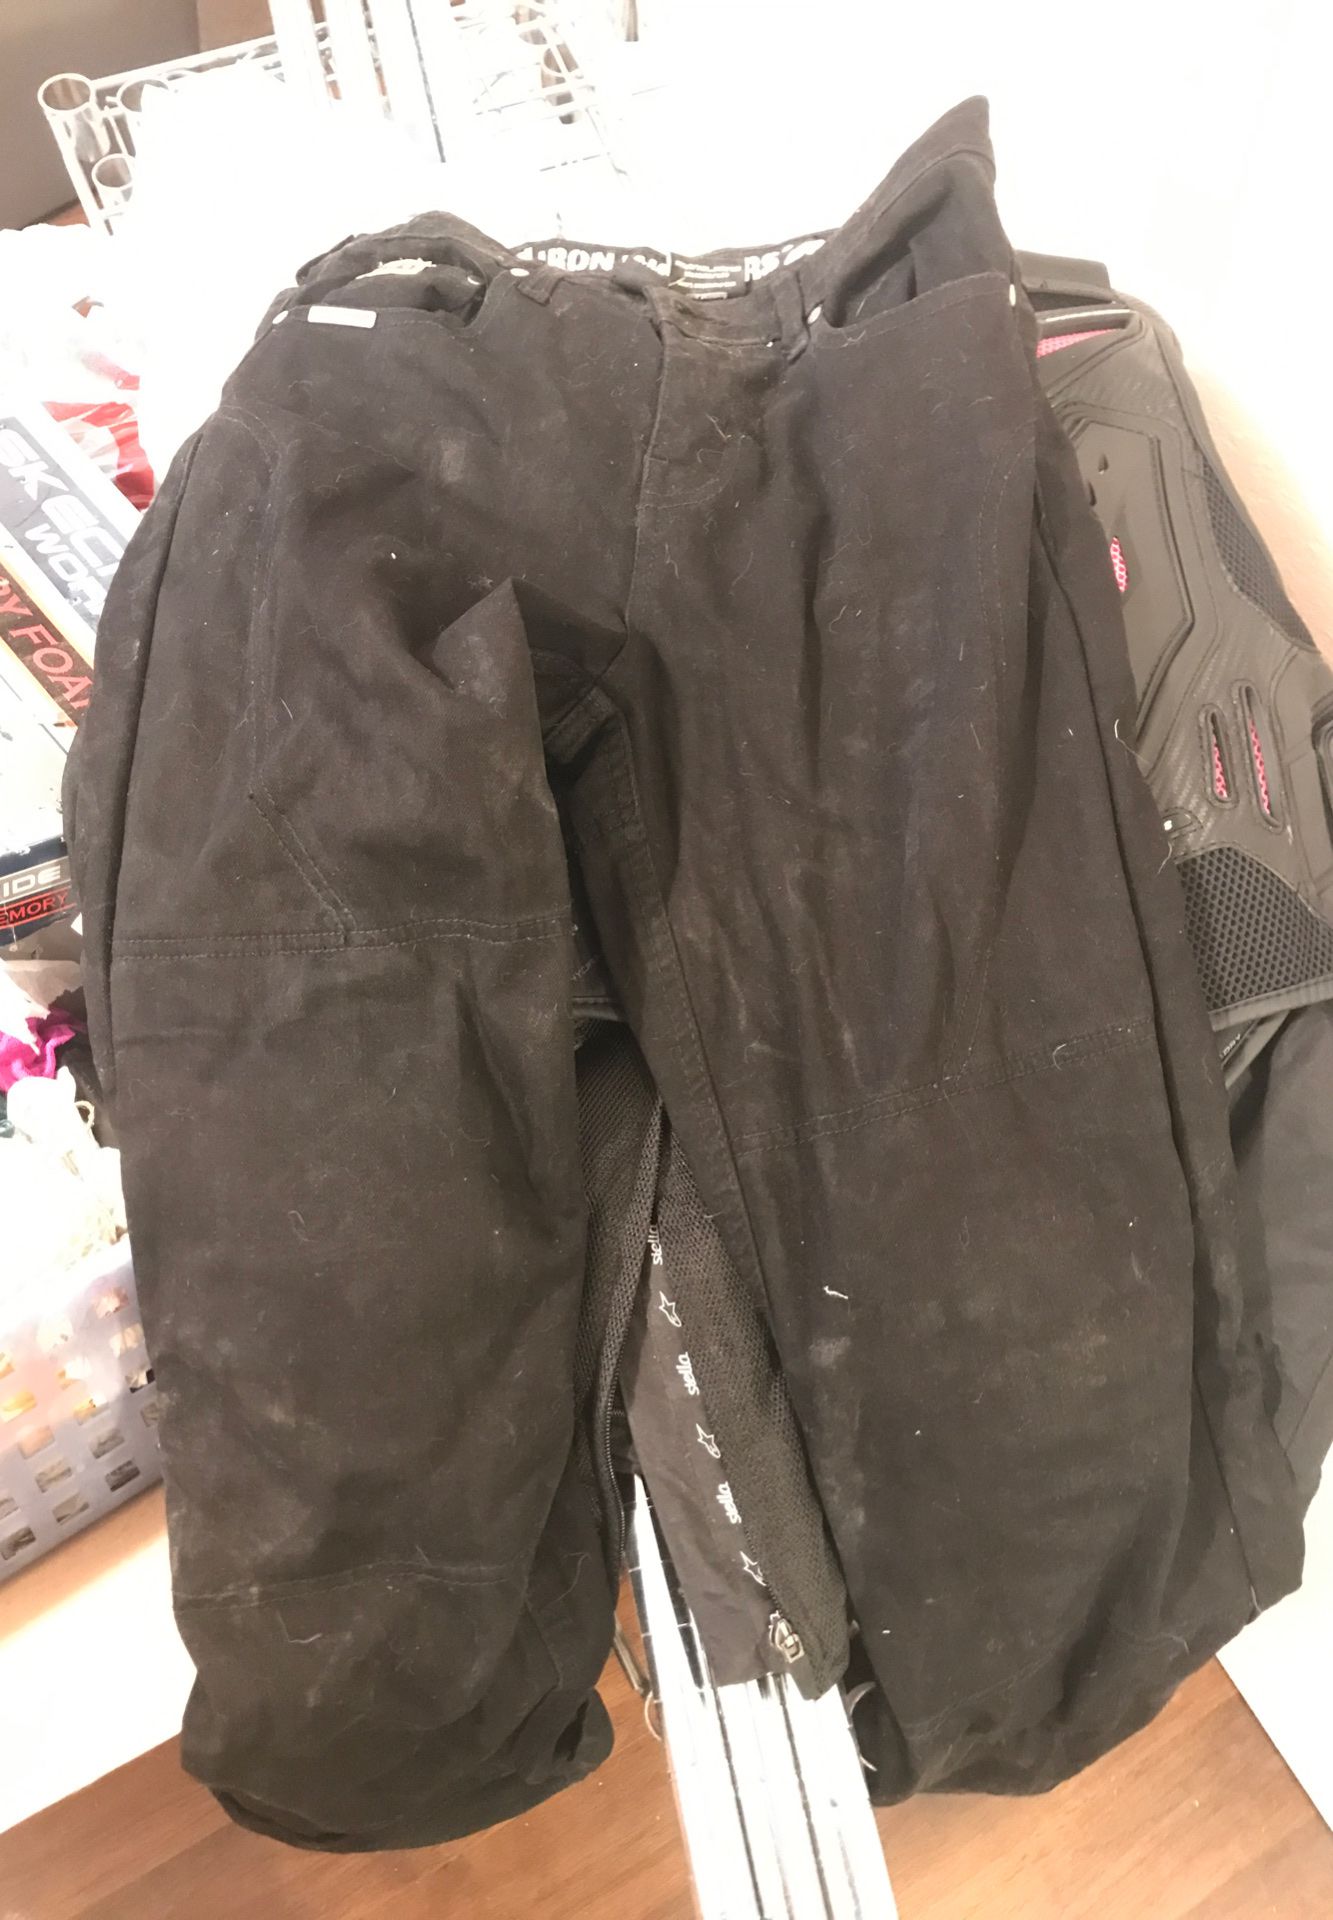 Motorcycle riding gear pants